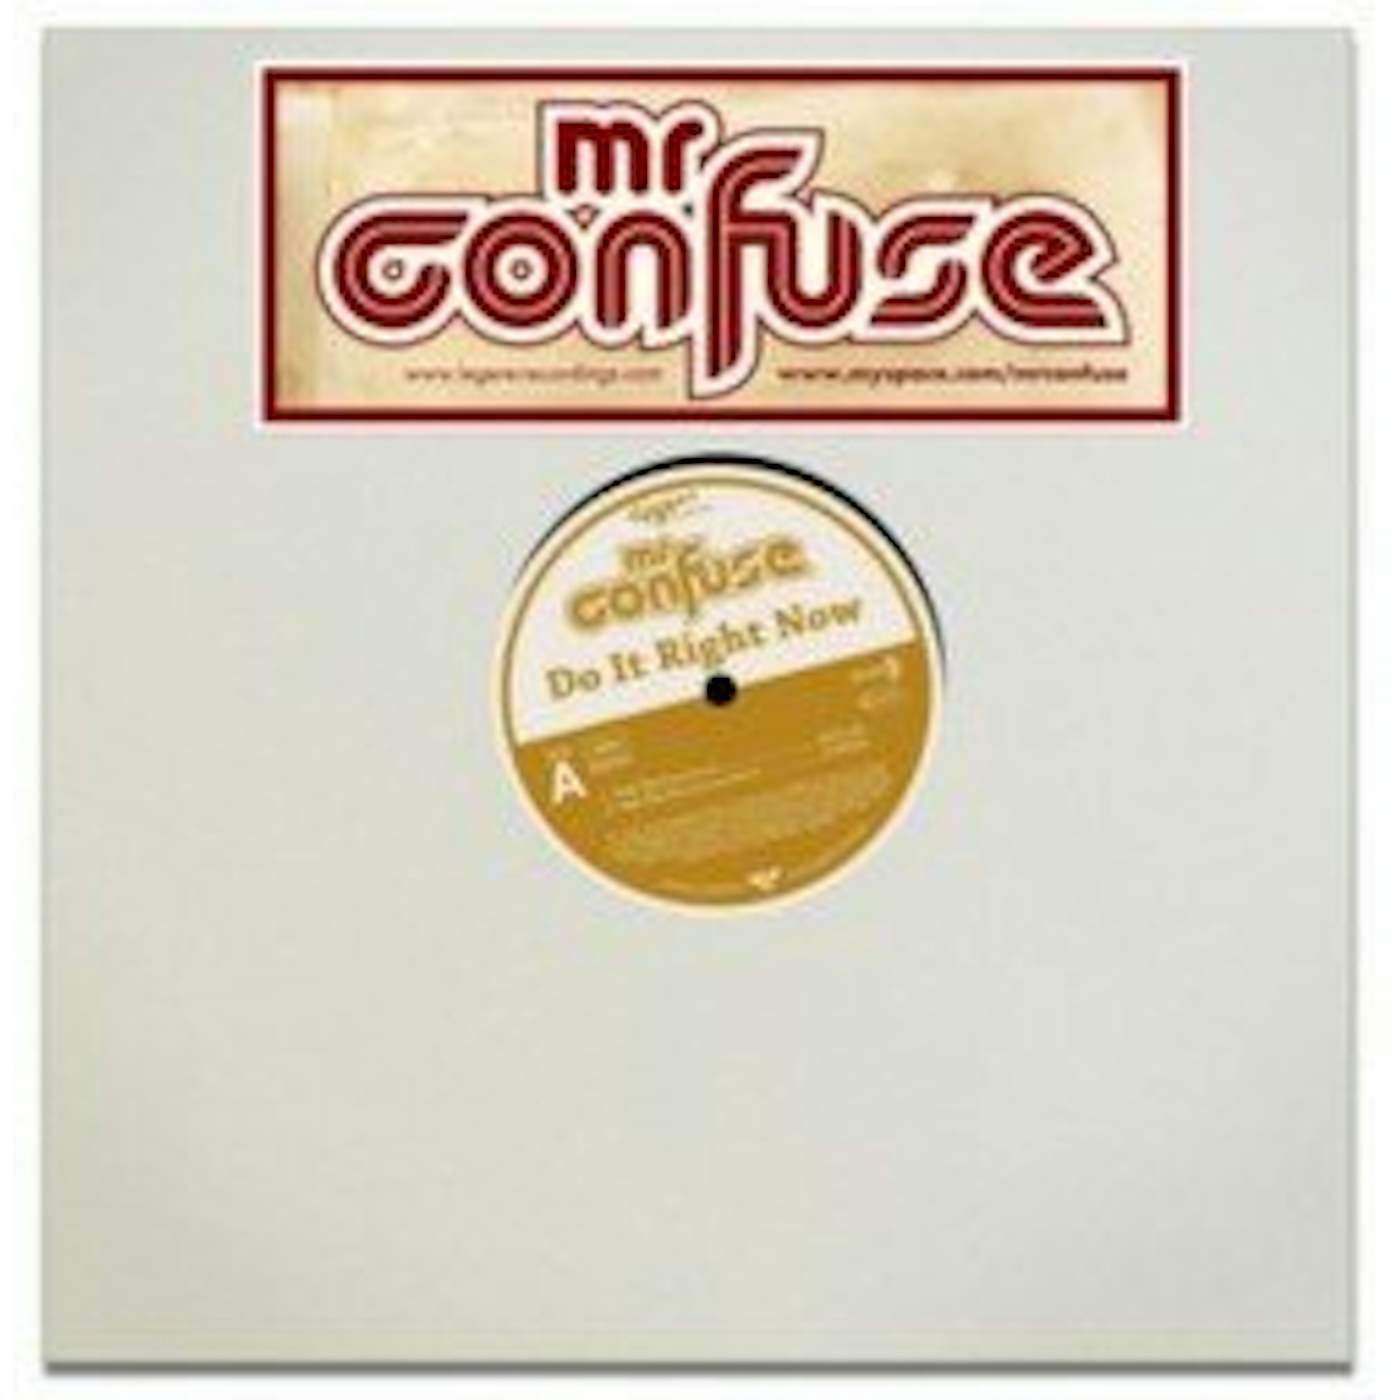 Mr. Confuse DO IT RIGHT Vinyl Record - UK Release